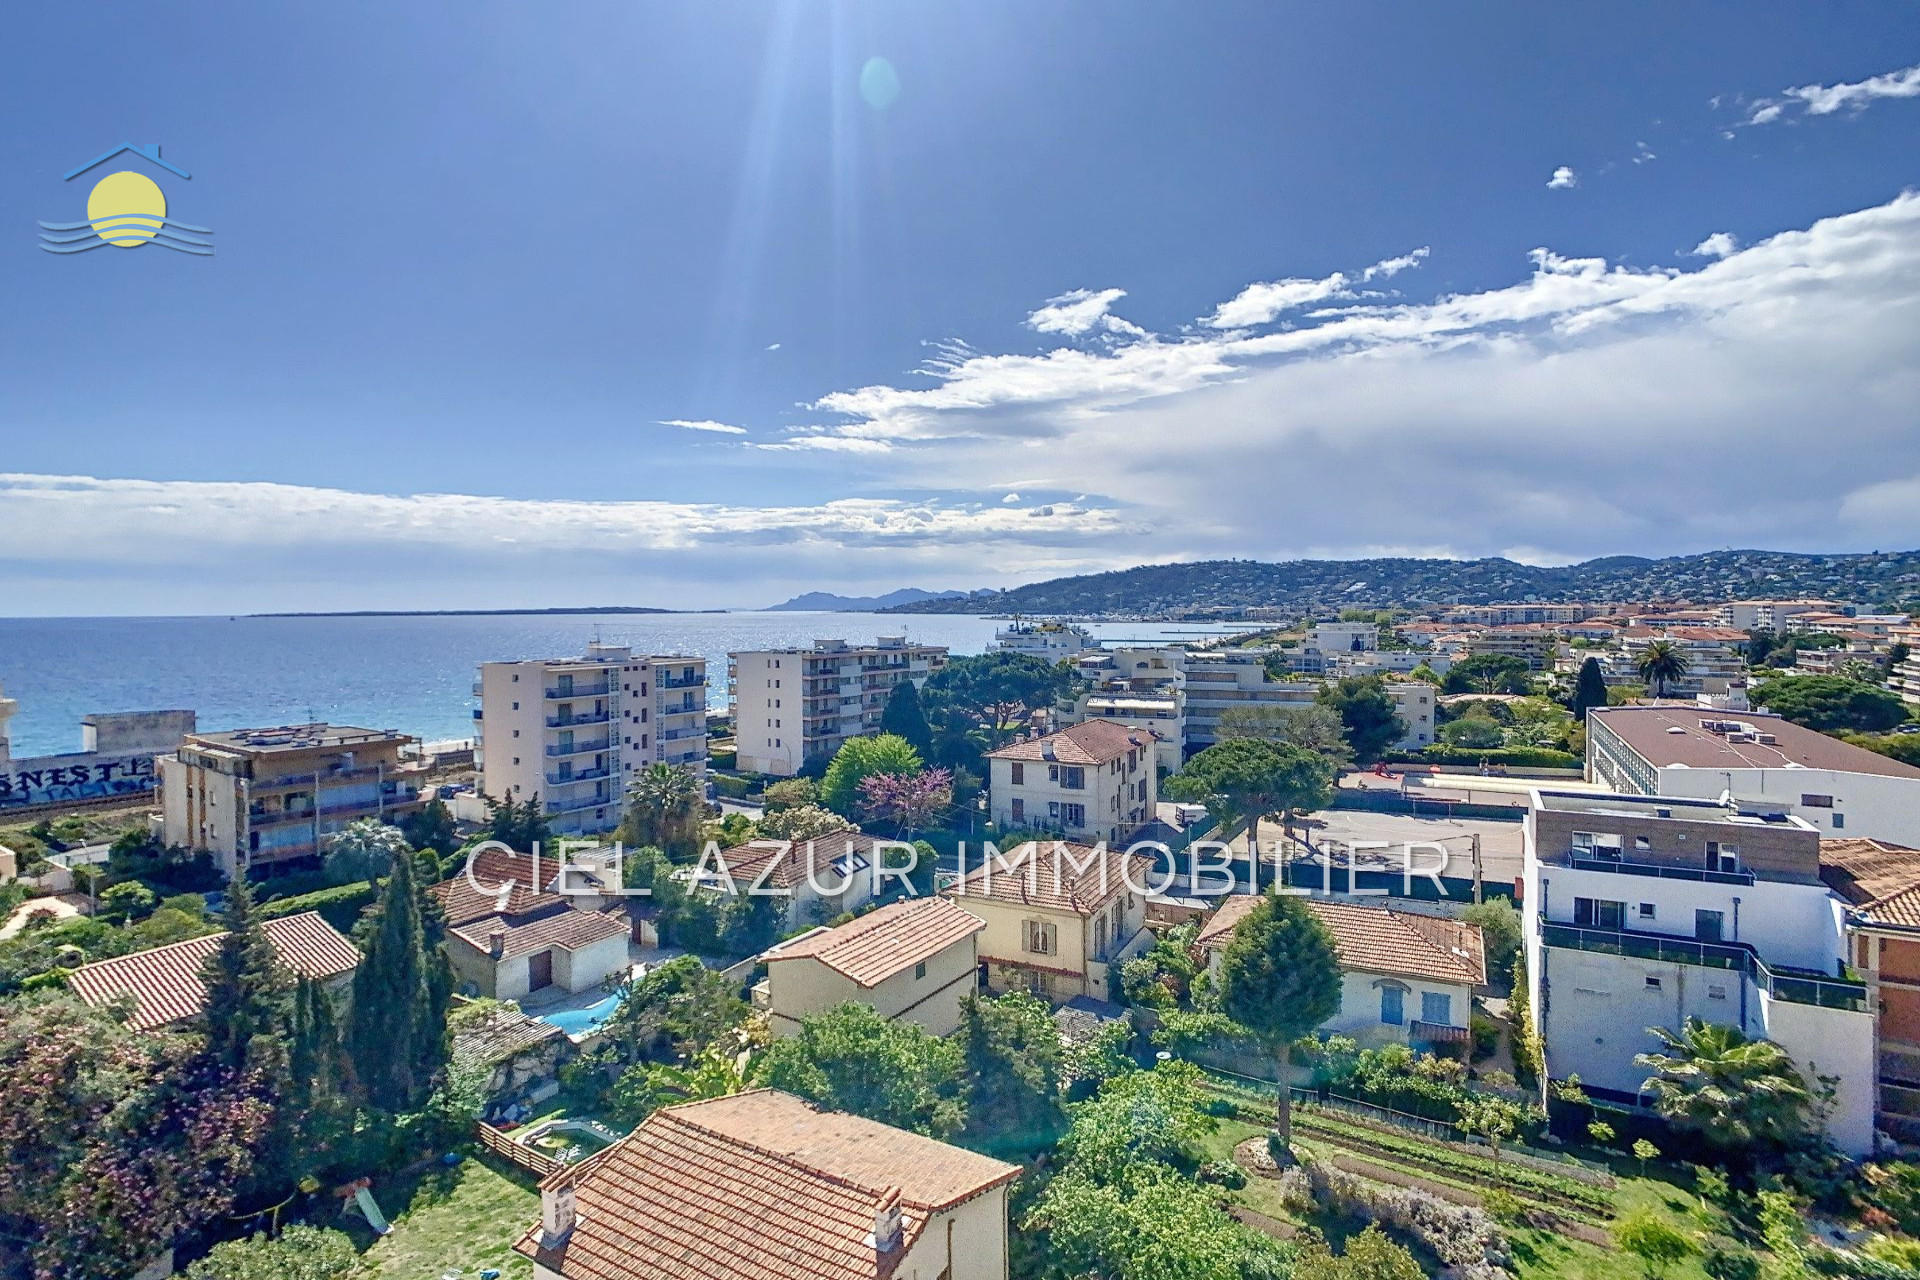 Appartement 2 pièces - 55m² - ANTIBES